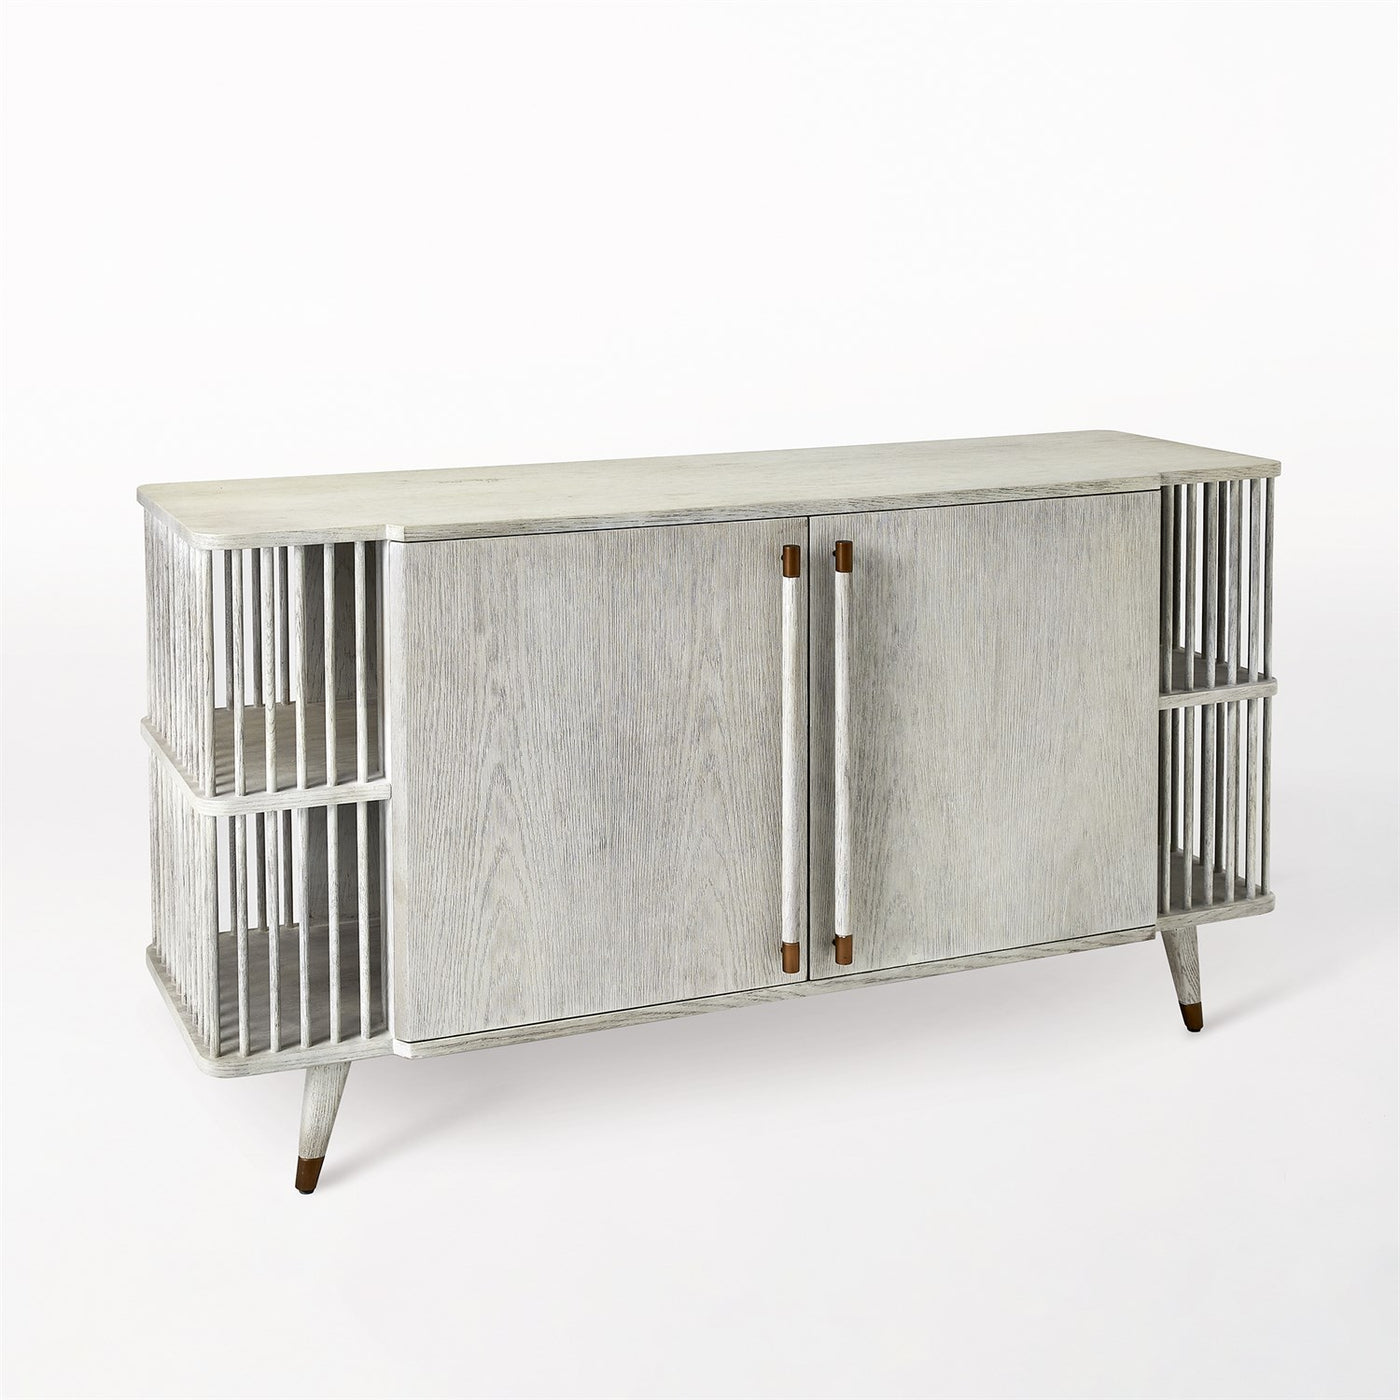 ARBOR MEDIA CABINET-WHITE WASHED by Global Views